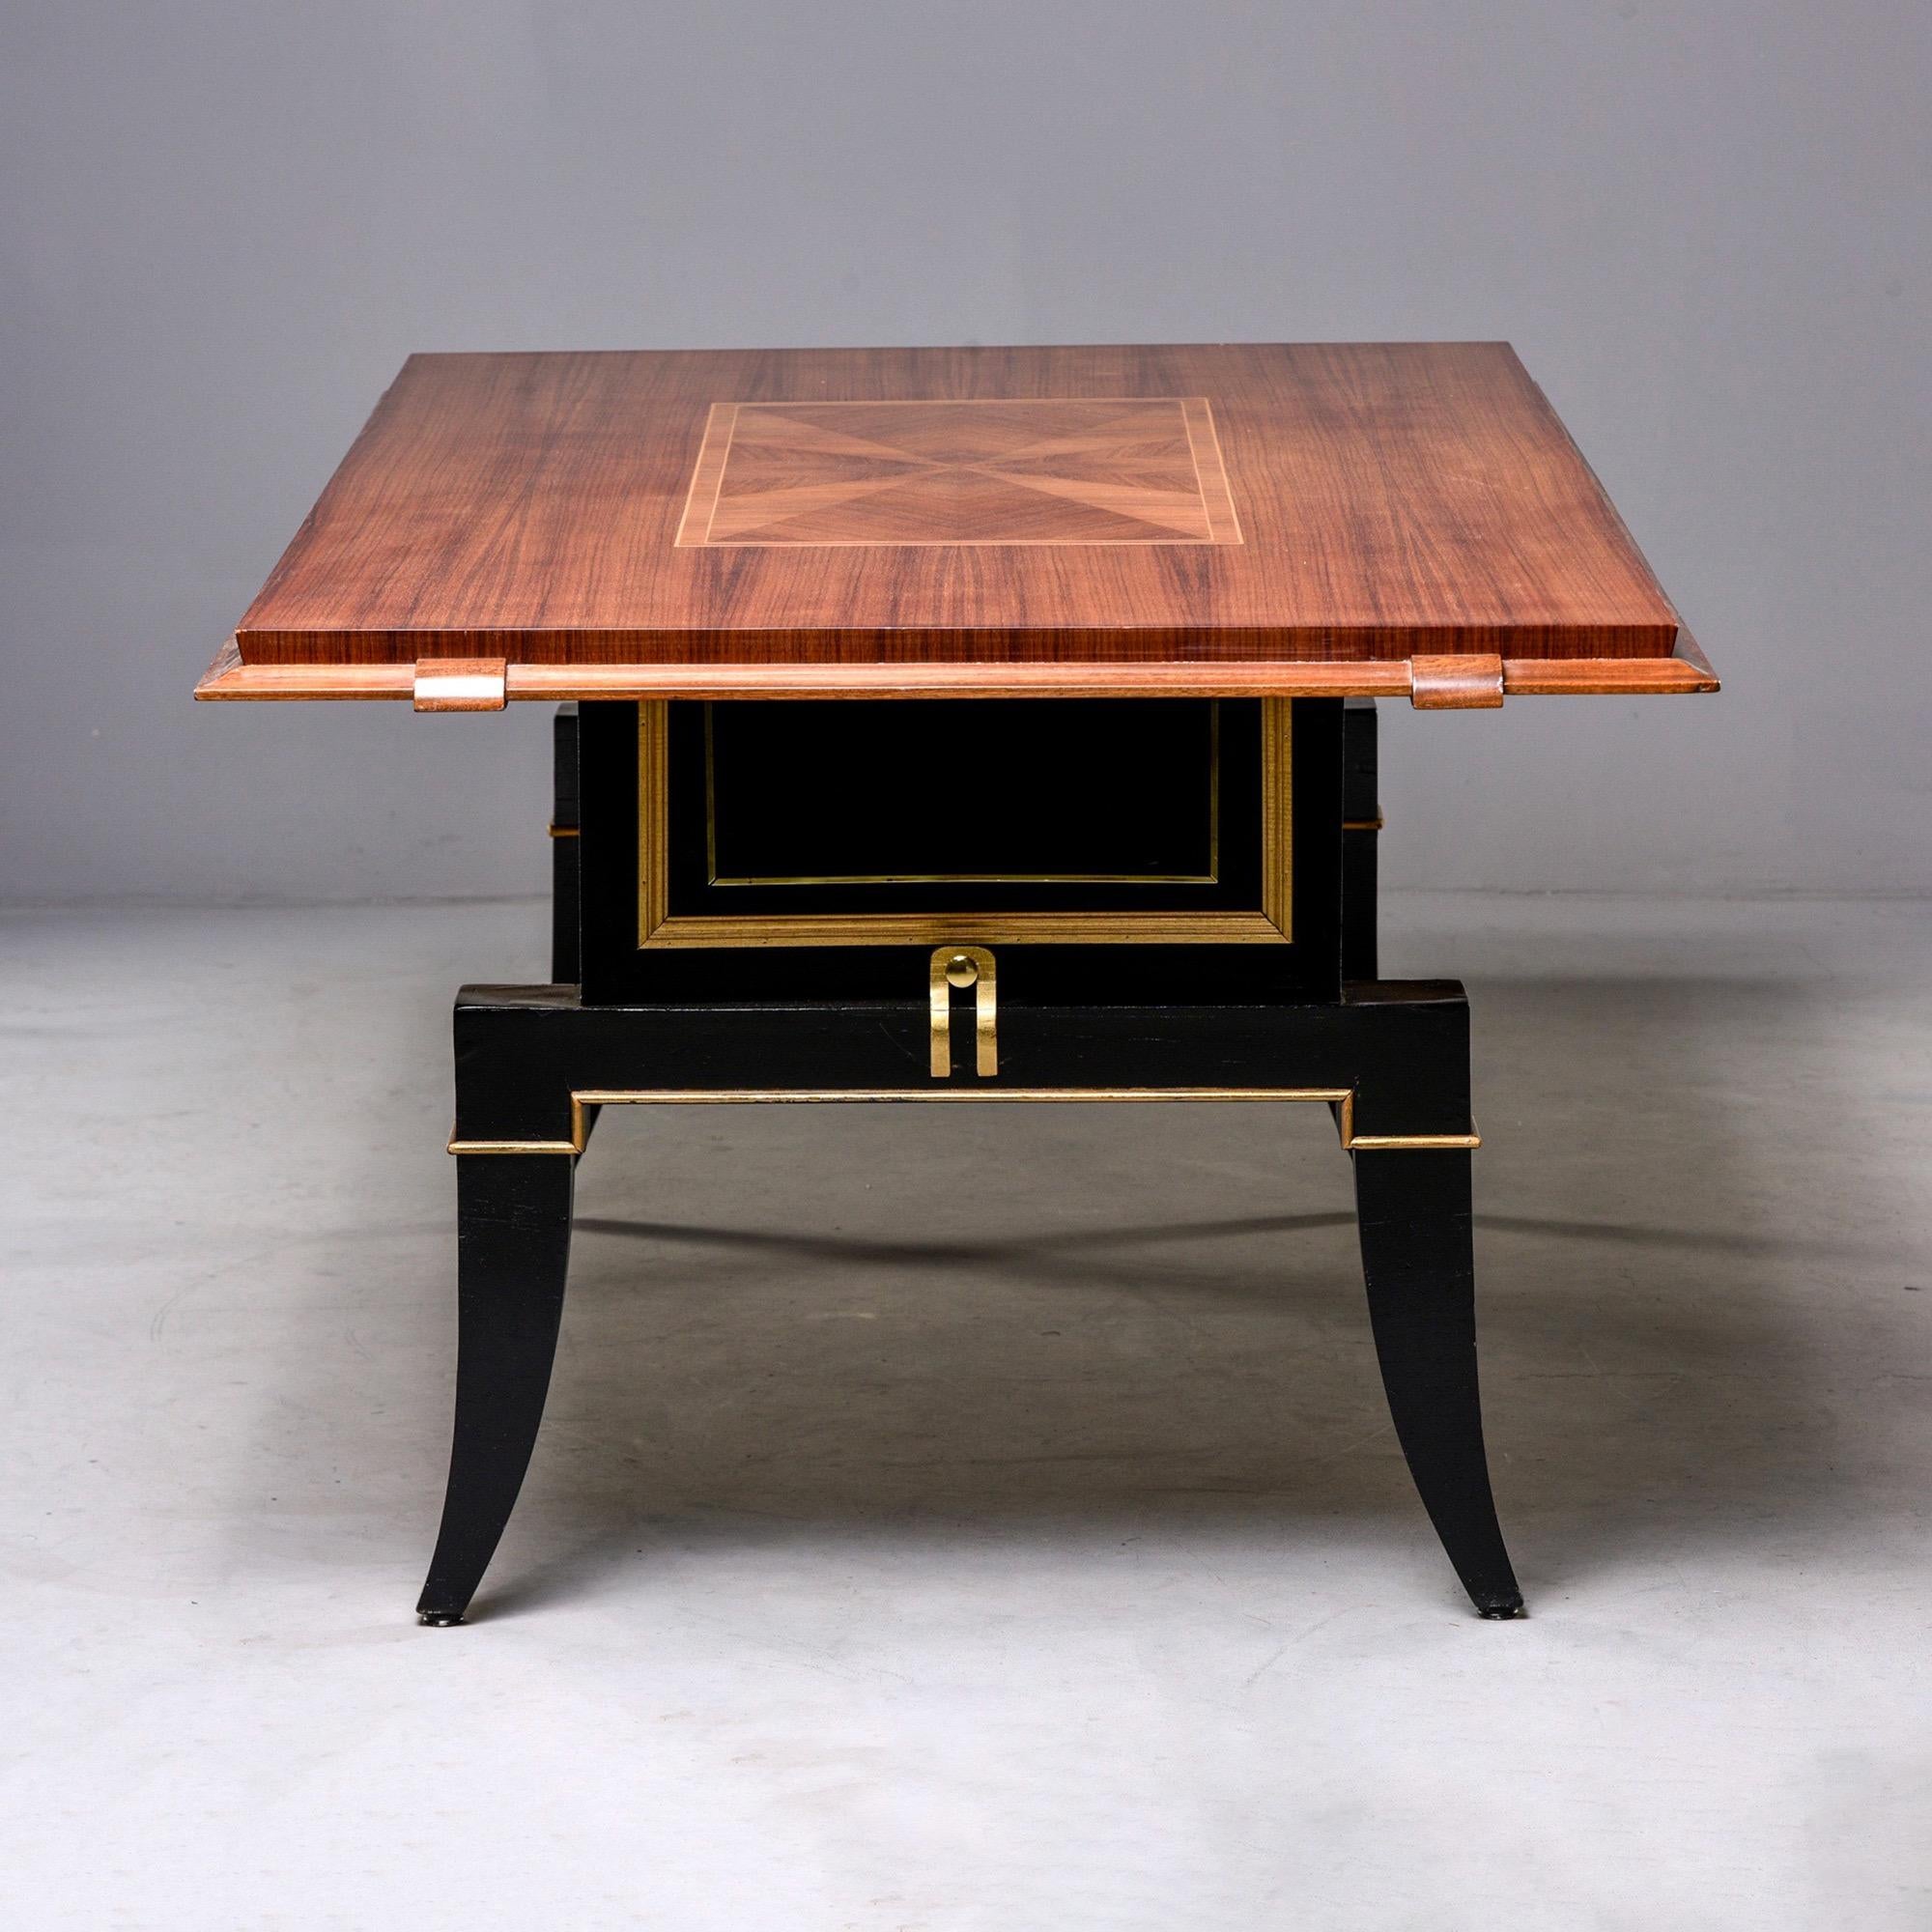 French Art Deco dining table features a polished top with inlay details, beveled edge and contrasting black and giltwood base circa 1940s. Solidly constructed. Unknown maker.

Apron height 28”.